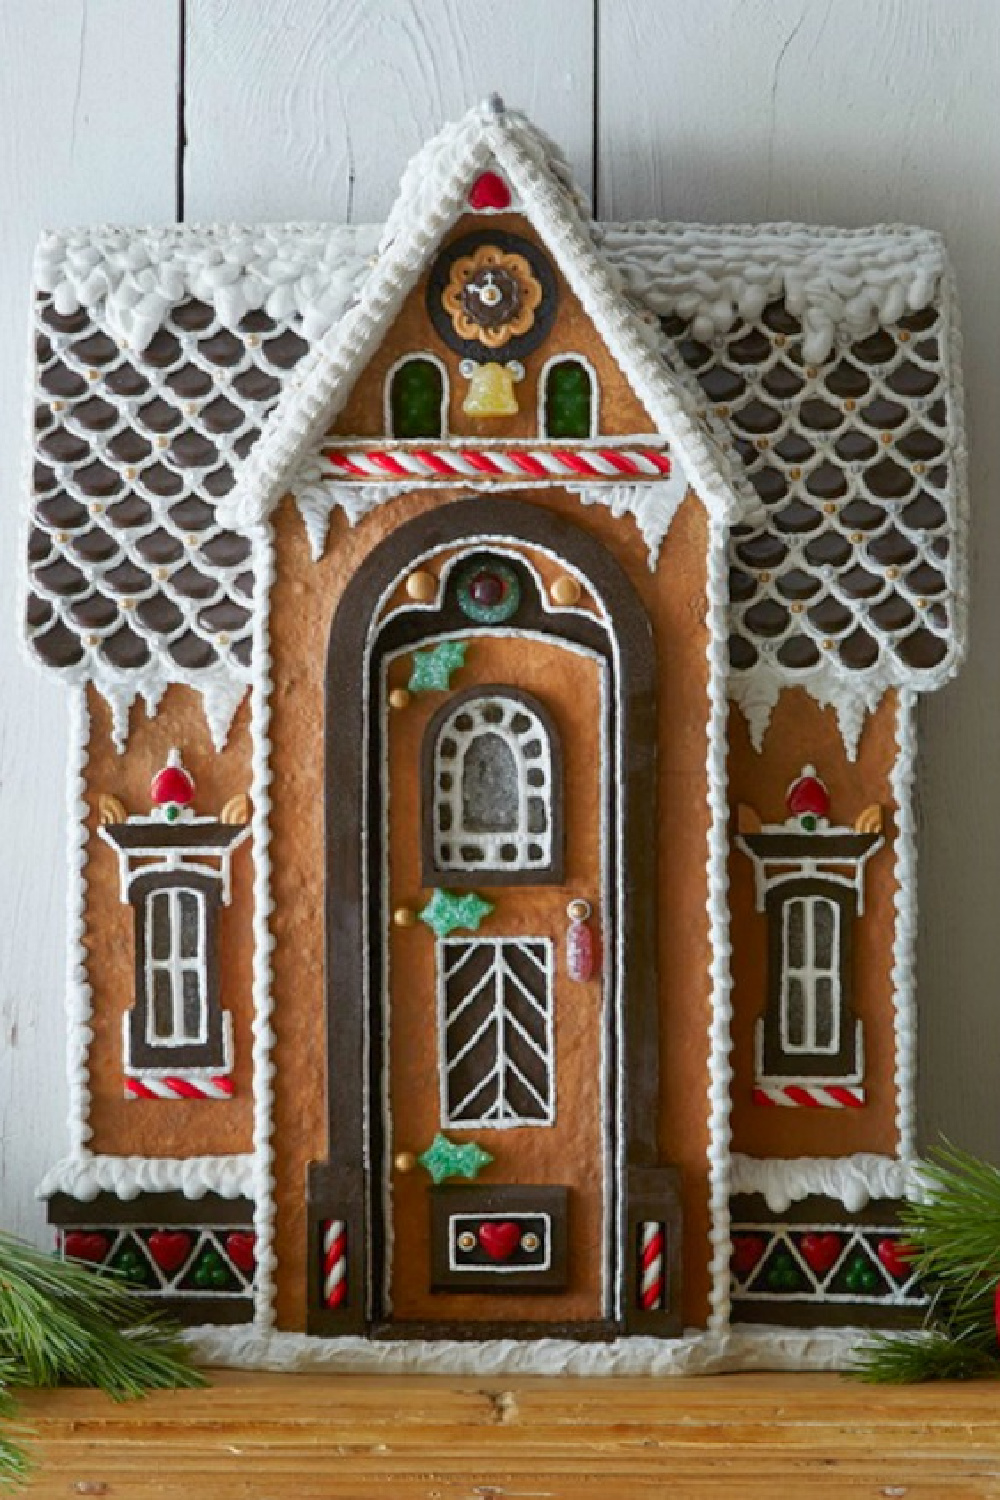 Charming and fanciful gingerbread house - Family Holiday. #christmasbaking #gingerbreadhouse